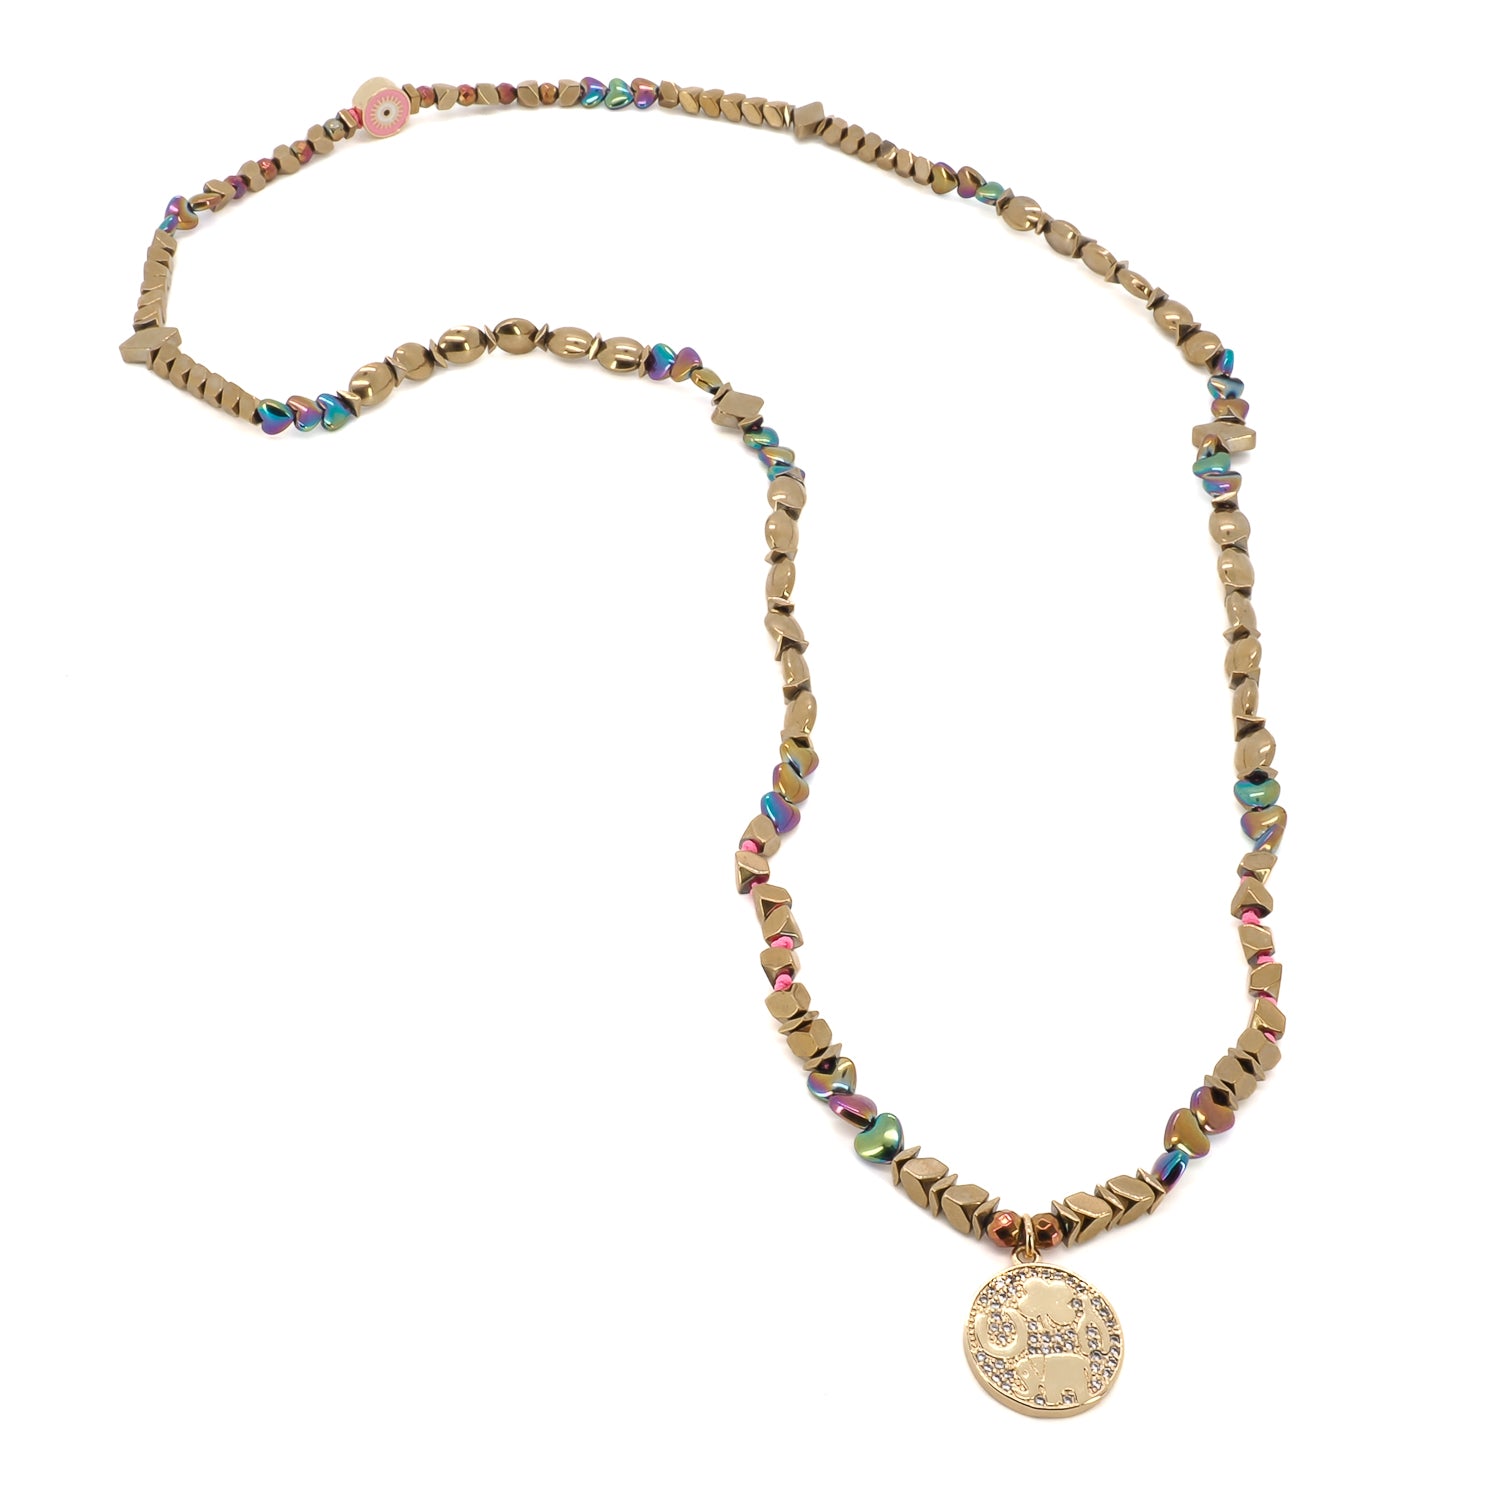 Eye-catching Luck Charm Necklace - A captivating image showcasing the vibrant Gold Good Luck Symbol Necklace.